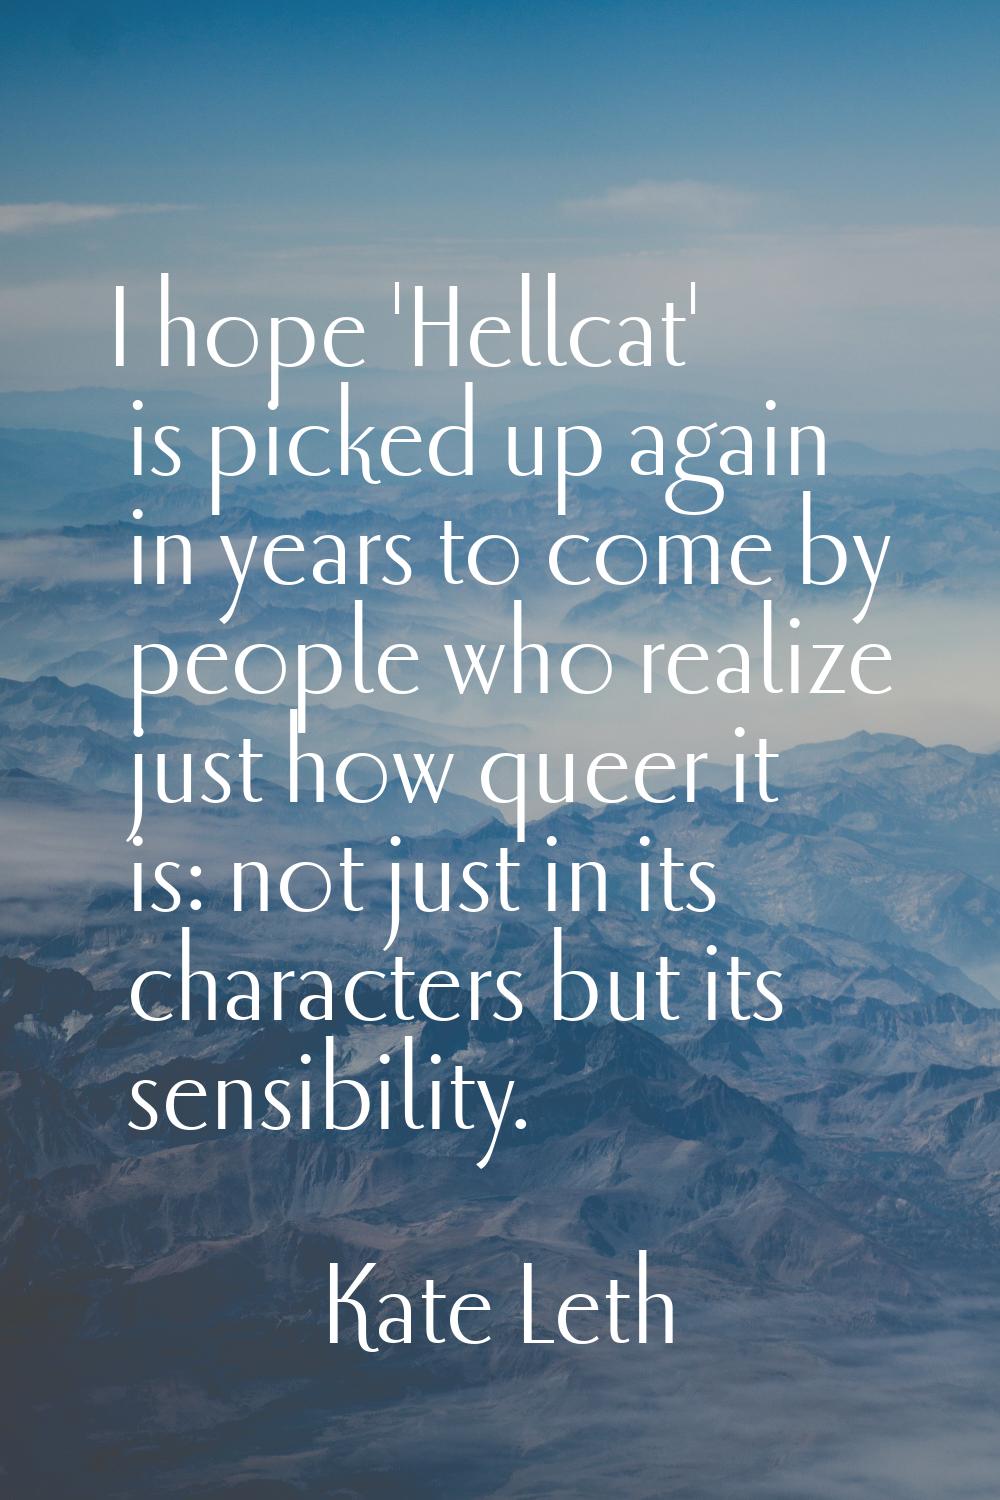 I hope 'Hellcat' is picked up again in years to come by people who realize just how queer it is: no